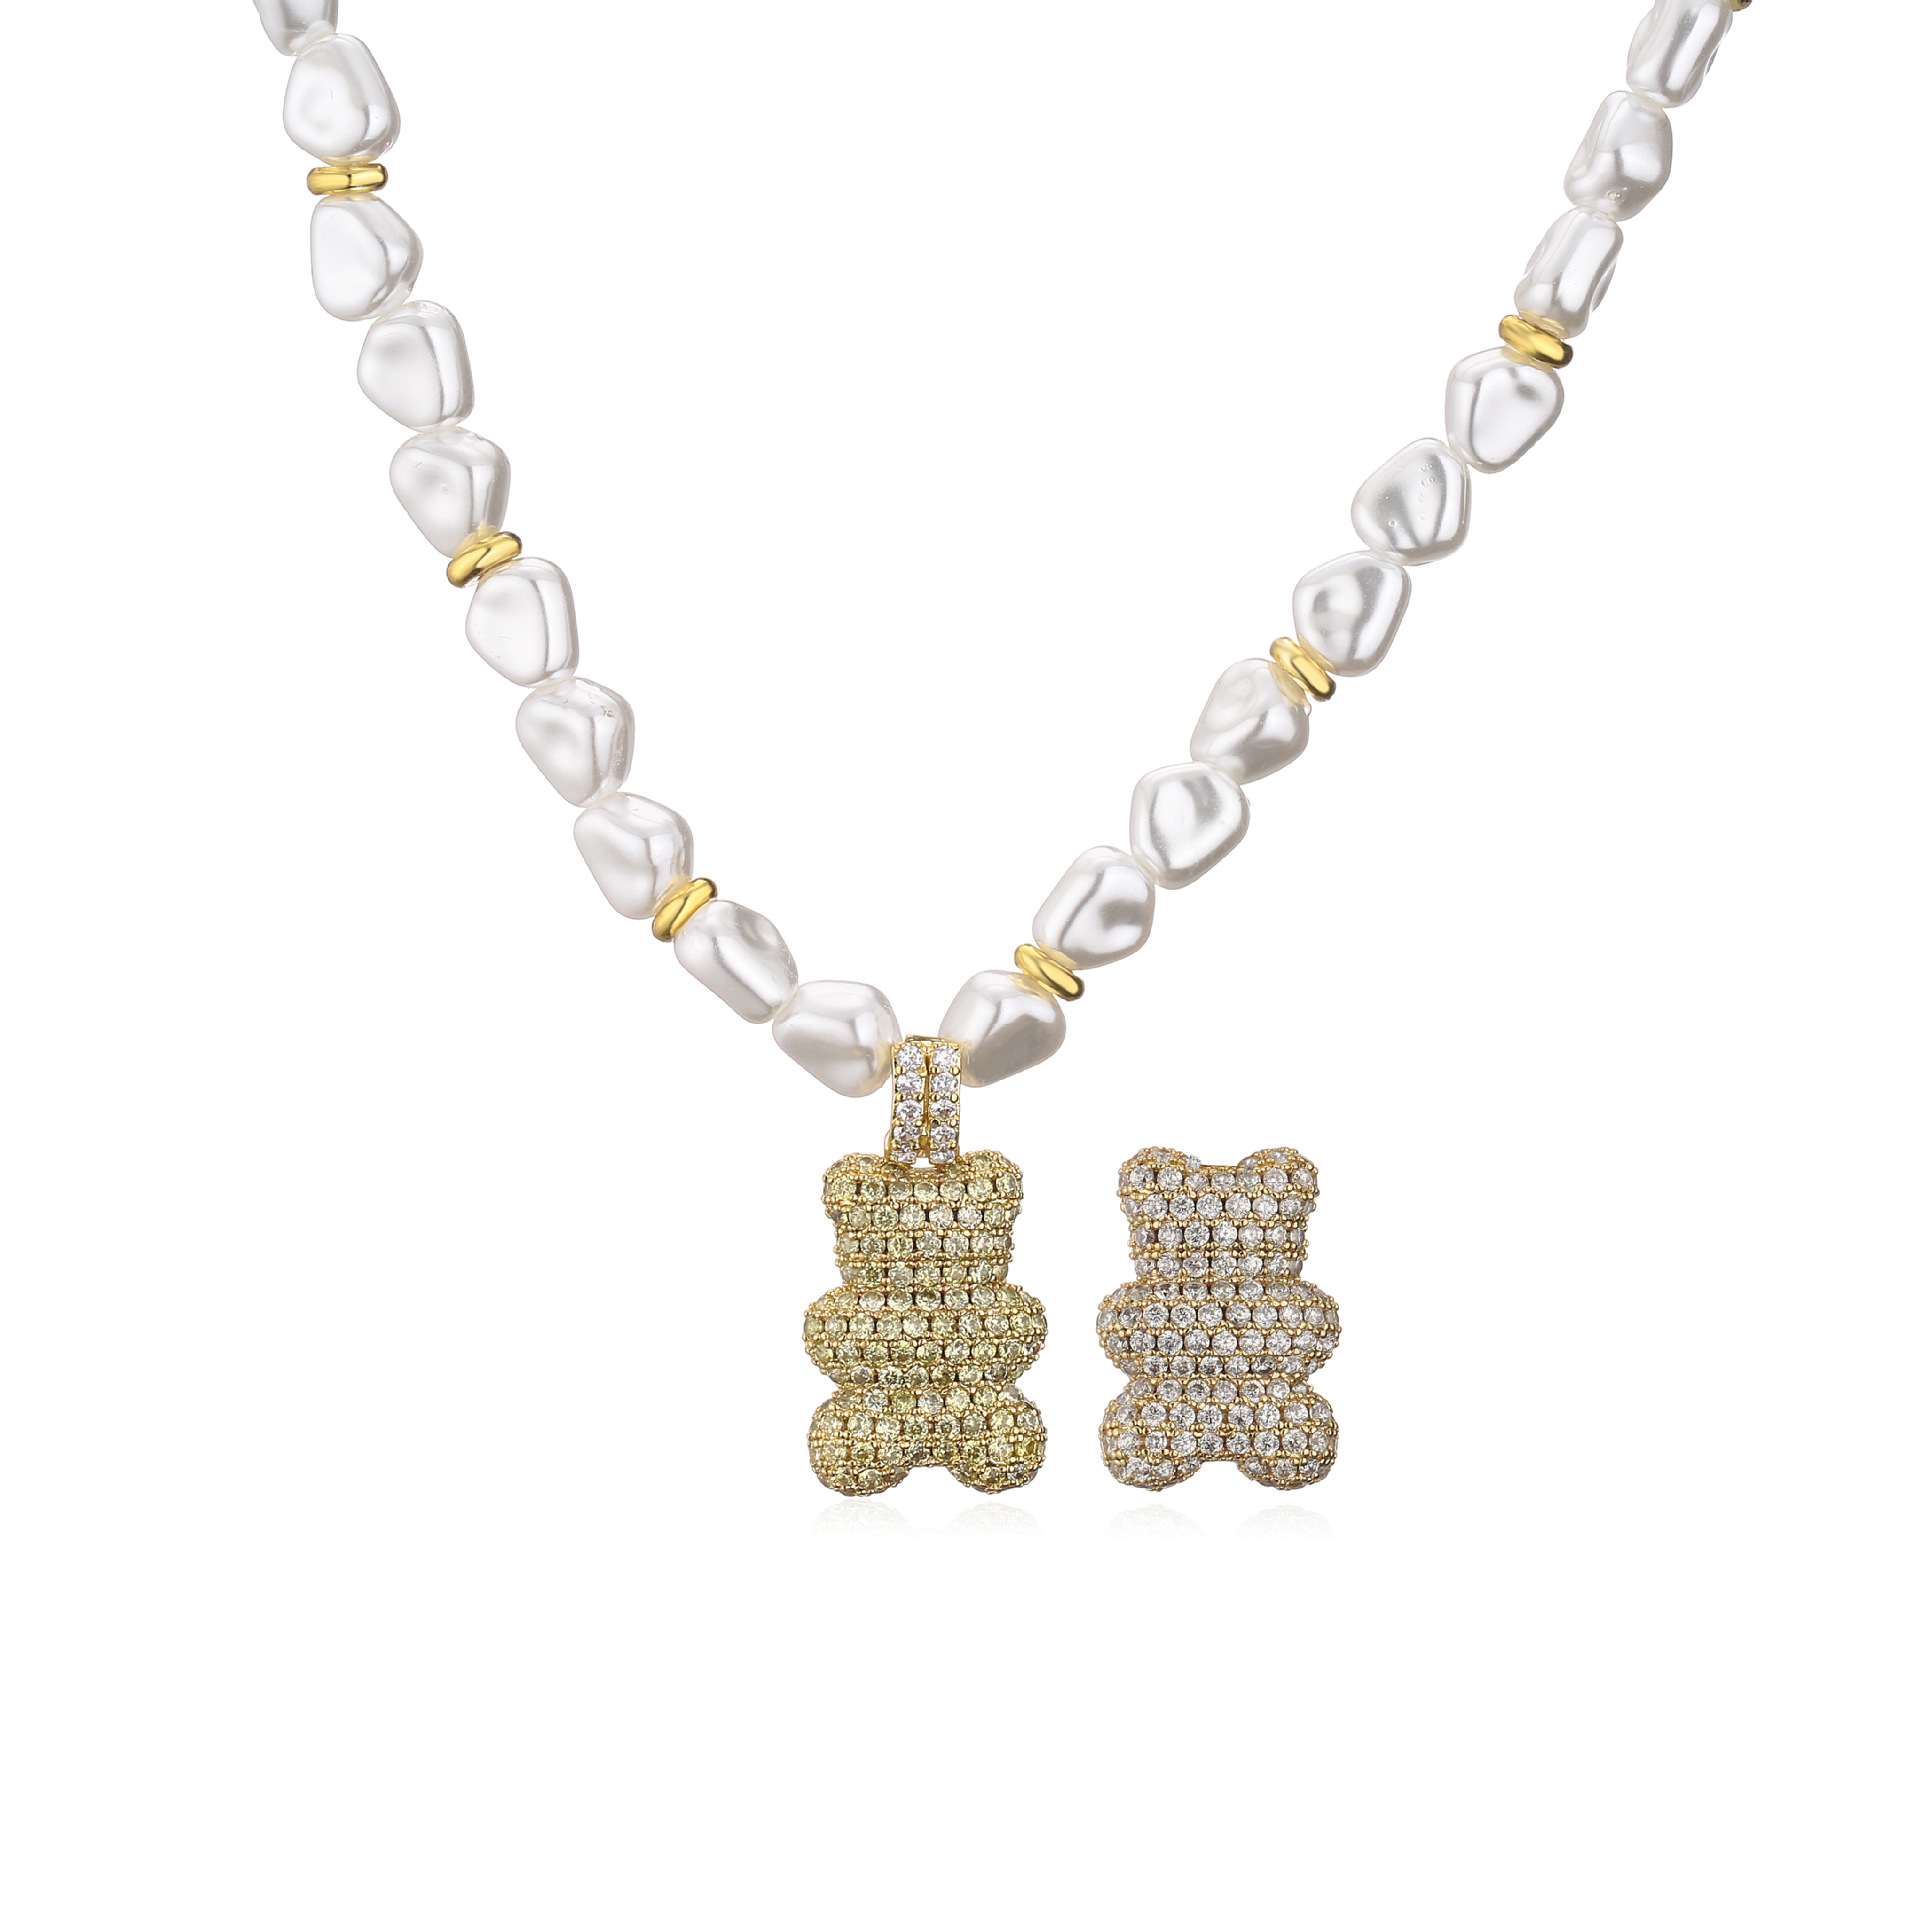 8:Green and White Bear Pearl necklace